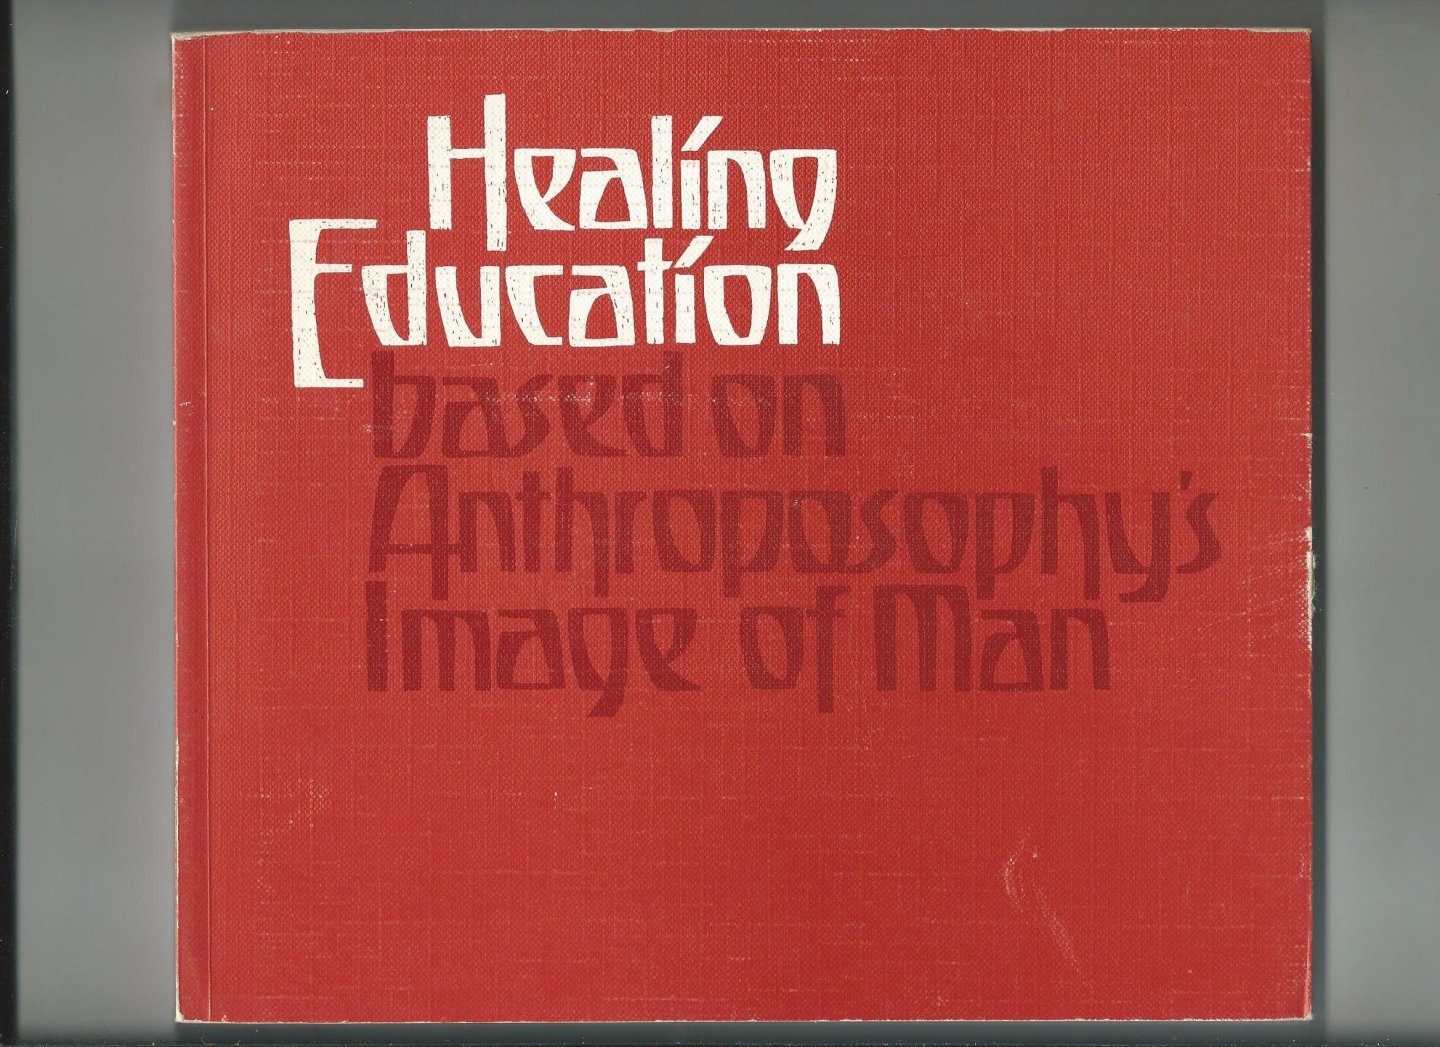 Fischer, Bernhard (Text editor) - Healing Education based on Anthroposophy's Image of Man. Living, Learning, Working with Cildren and Adults in Need of Special Soul Care.